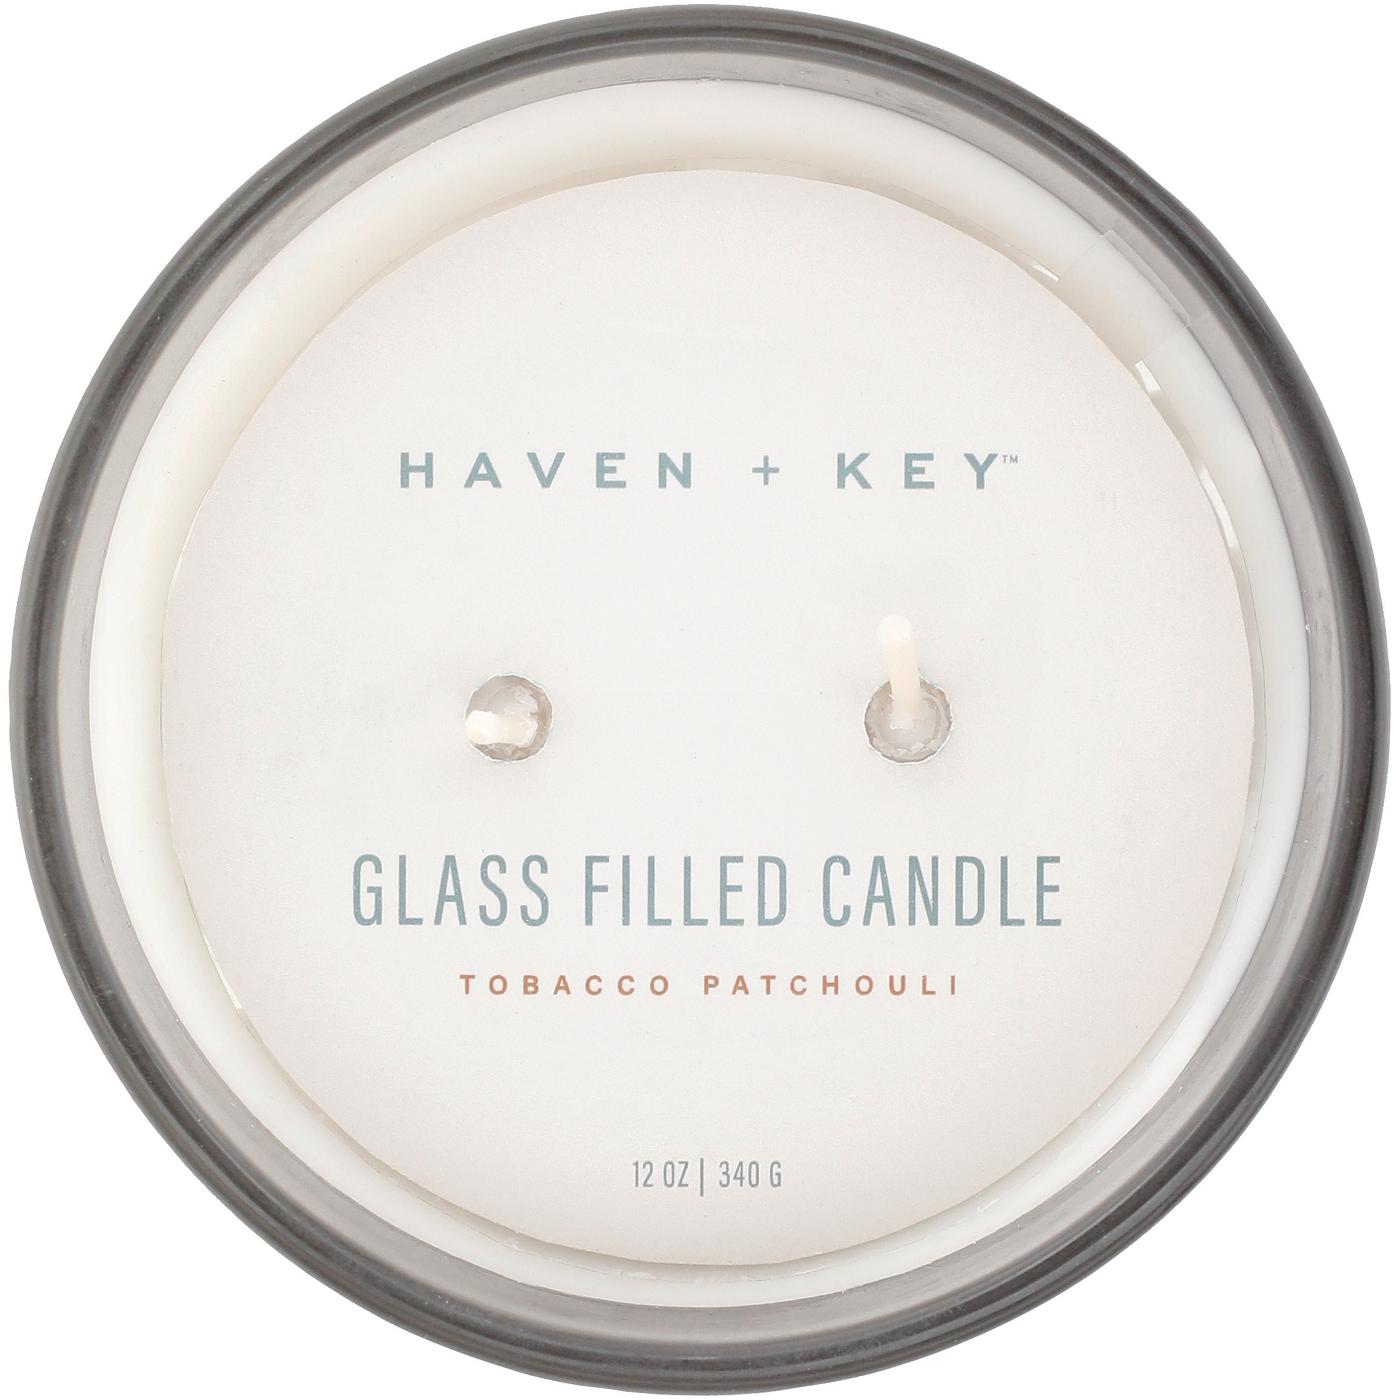 Haven + Key Tobacco & Patchouli Scented Candle; image 2 of 2